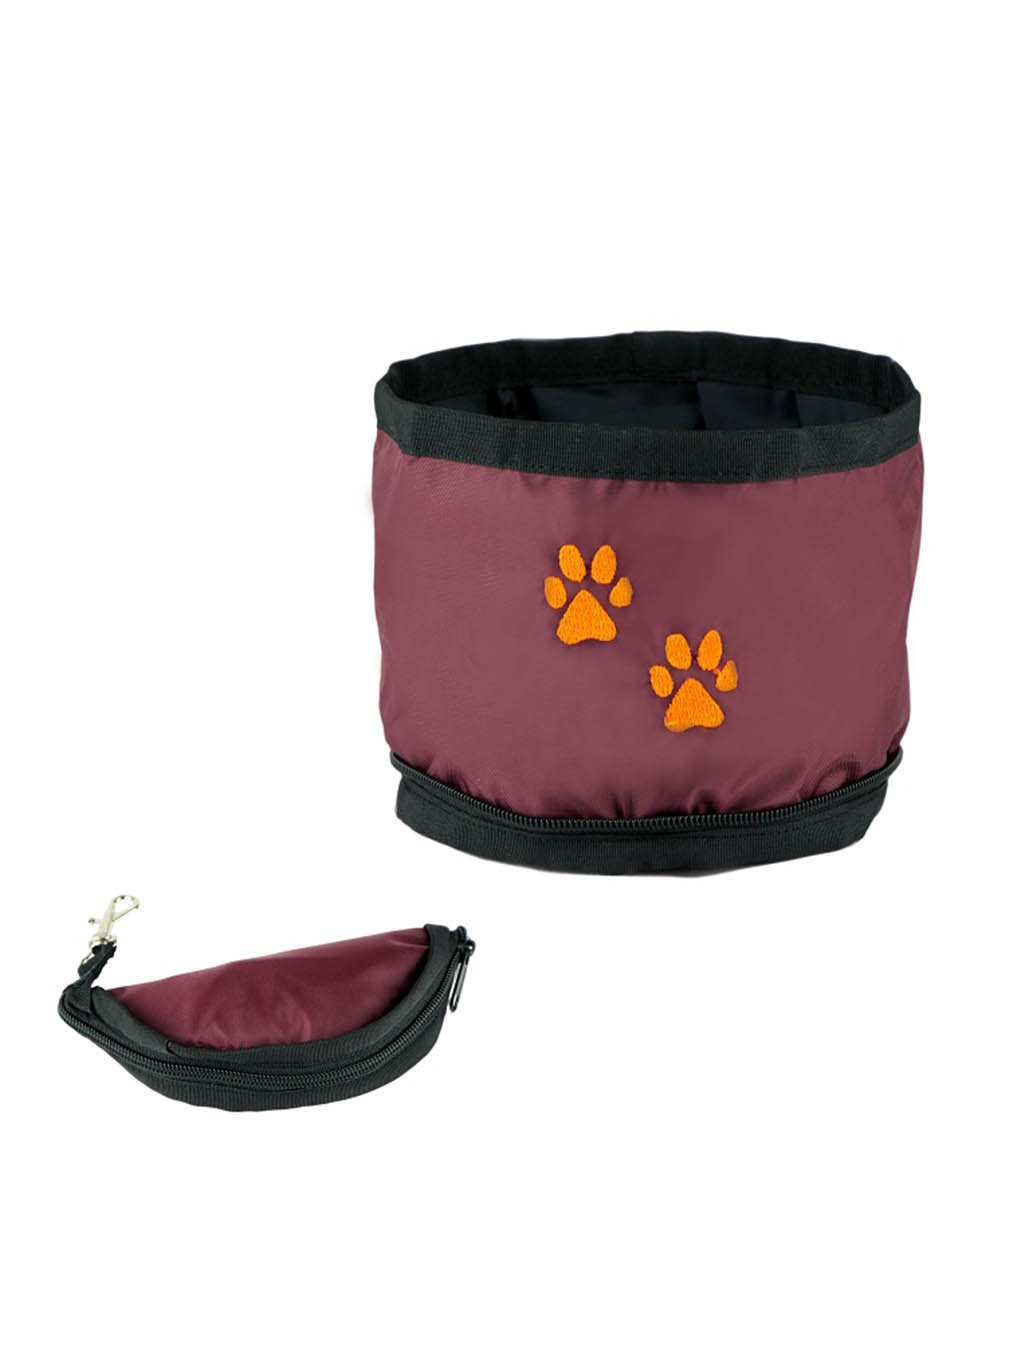 Travel bowl for larger dogs